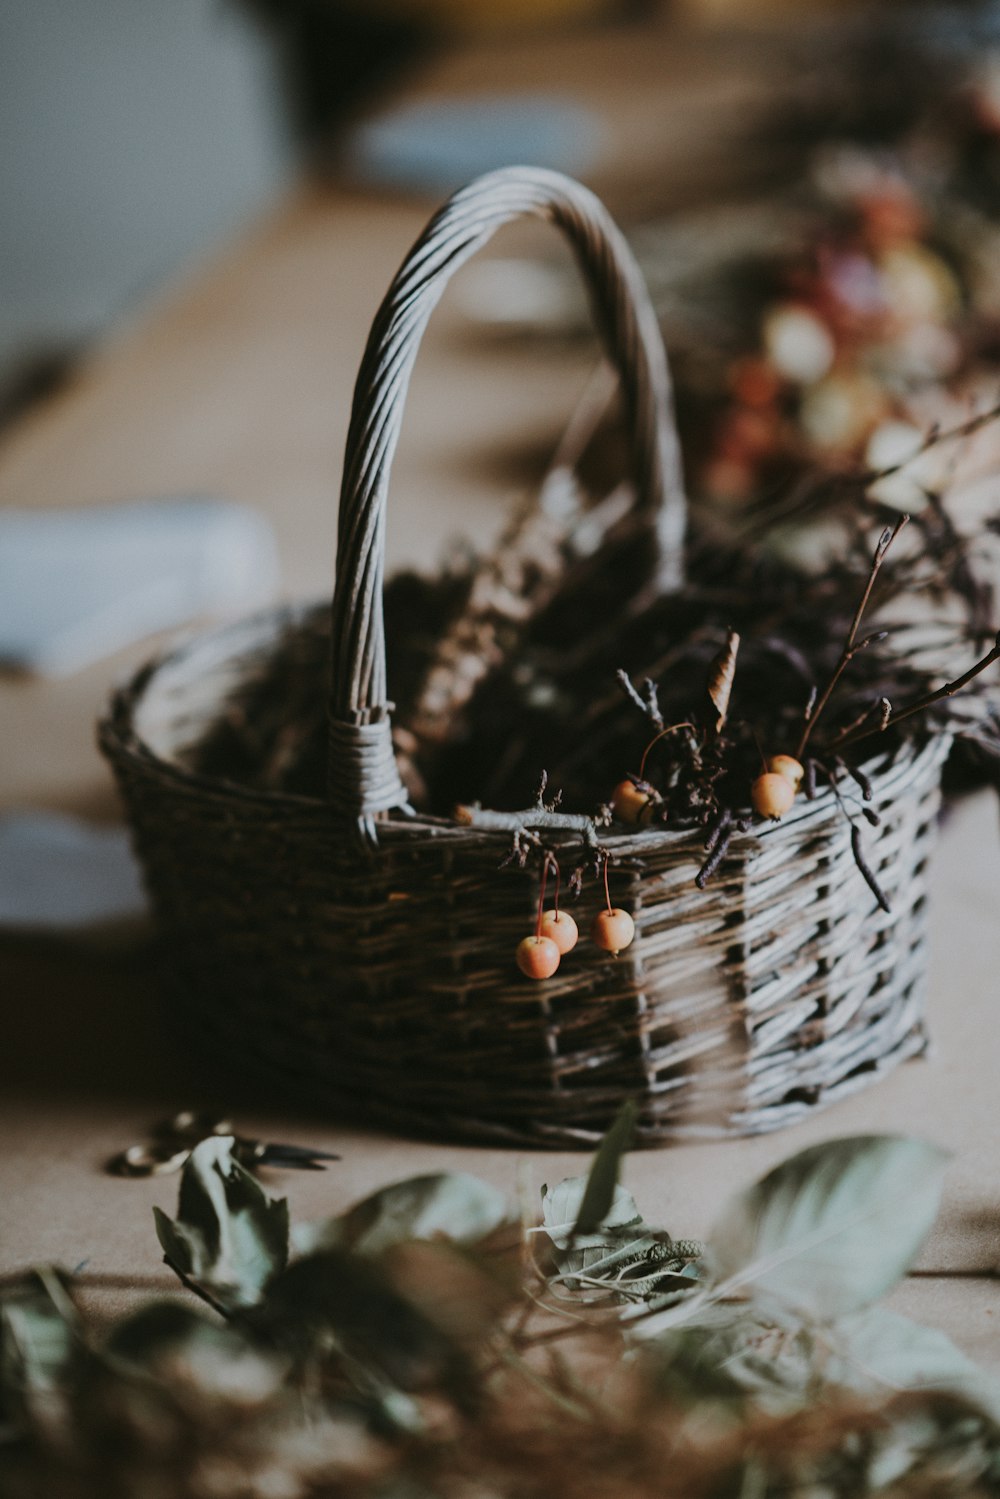 round yellow fruit with twigs in wicker brown basket on top of table inside  room photo – Free Basket Image on Unsplash